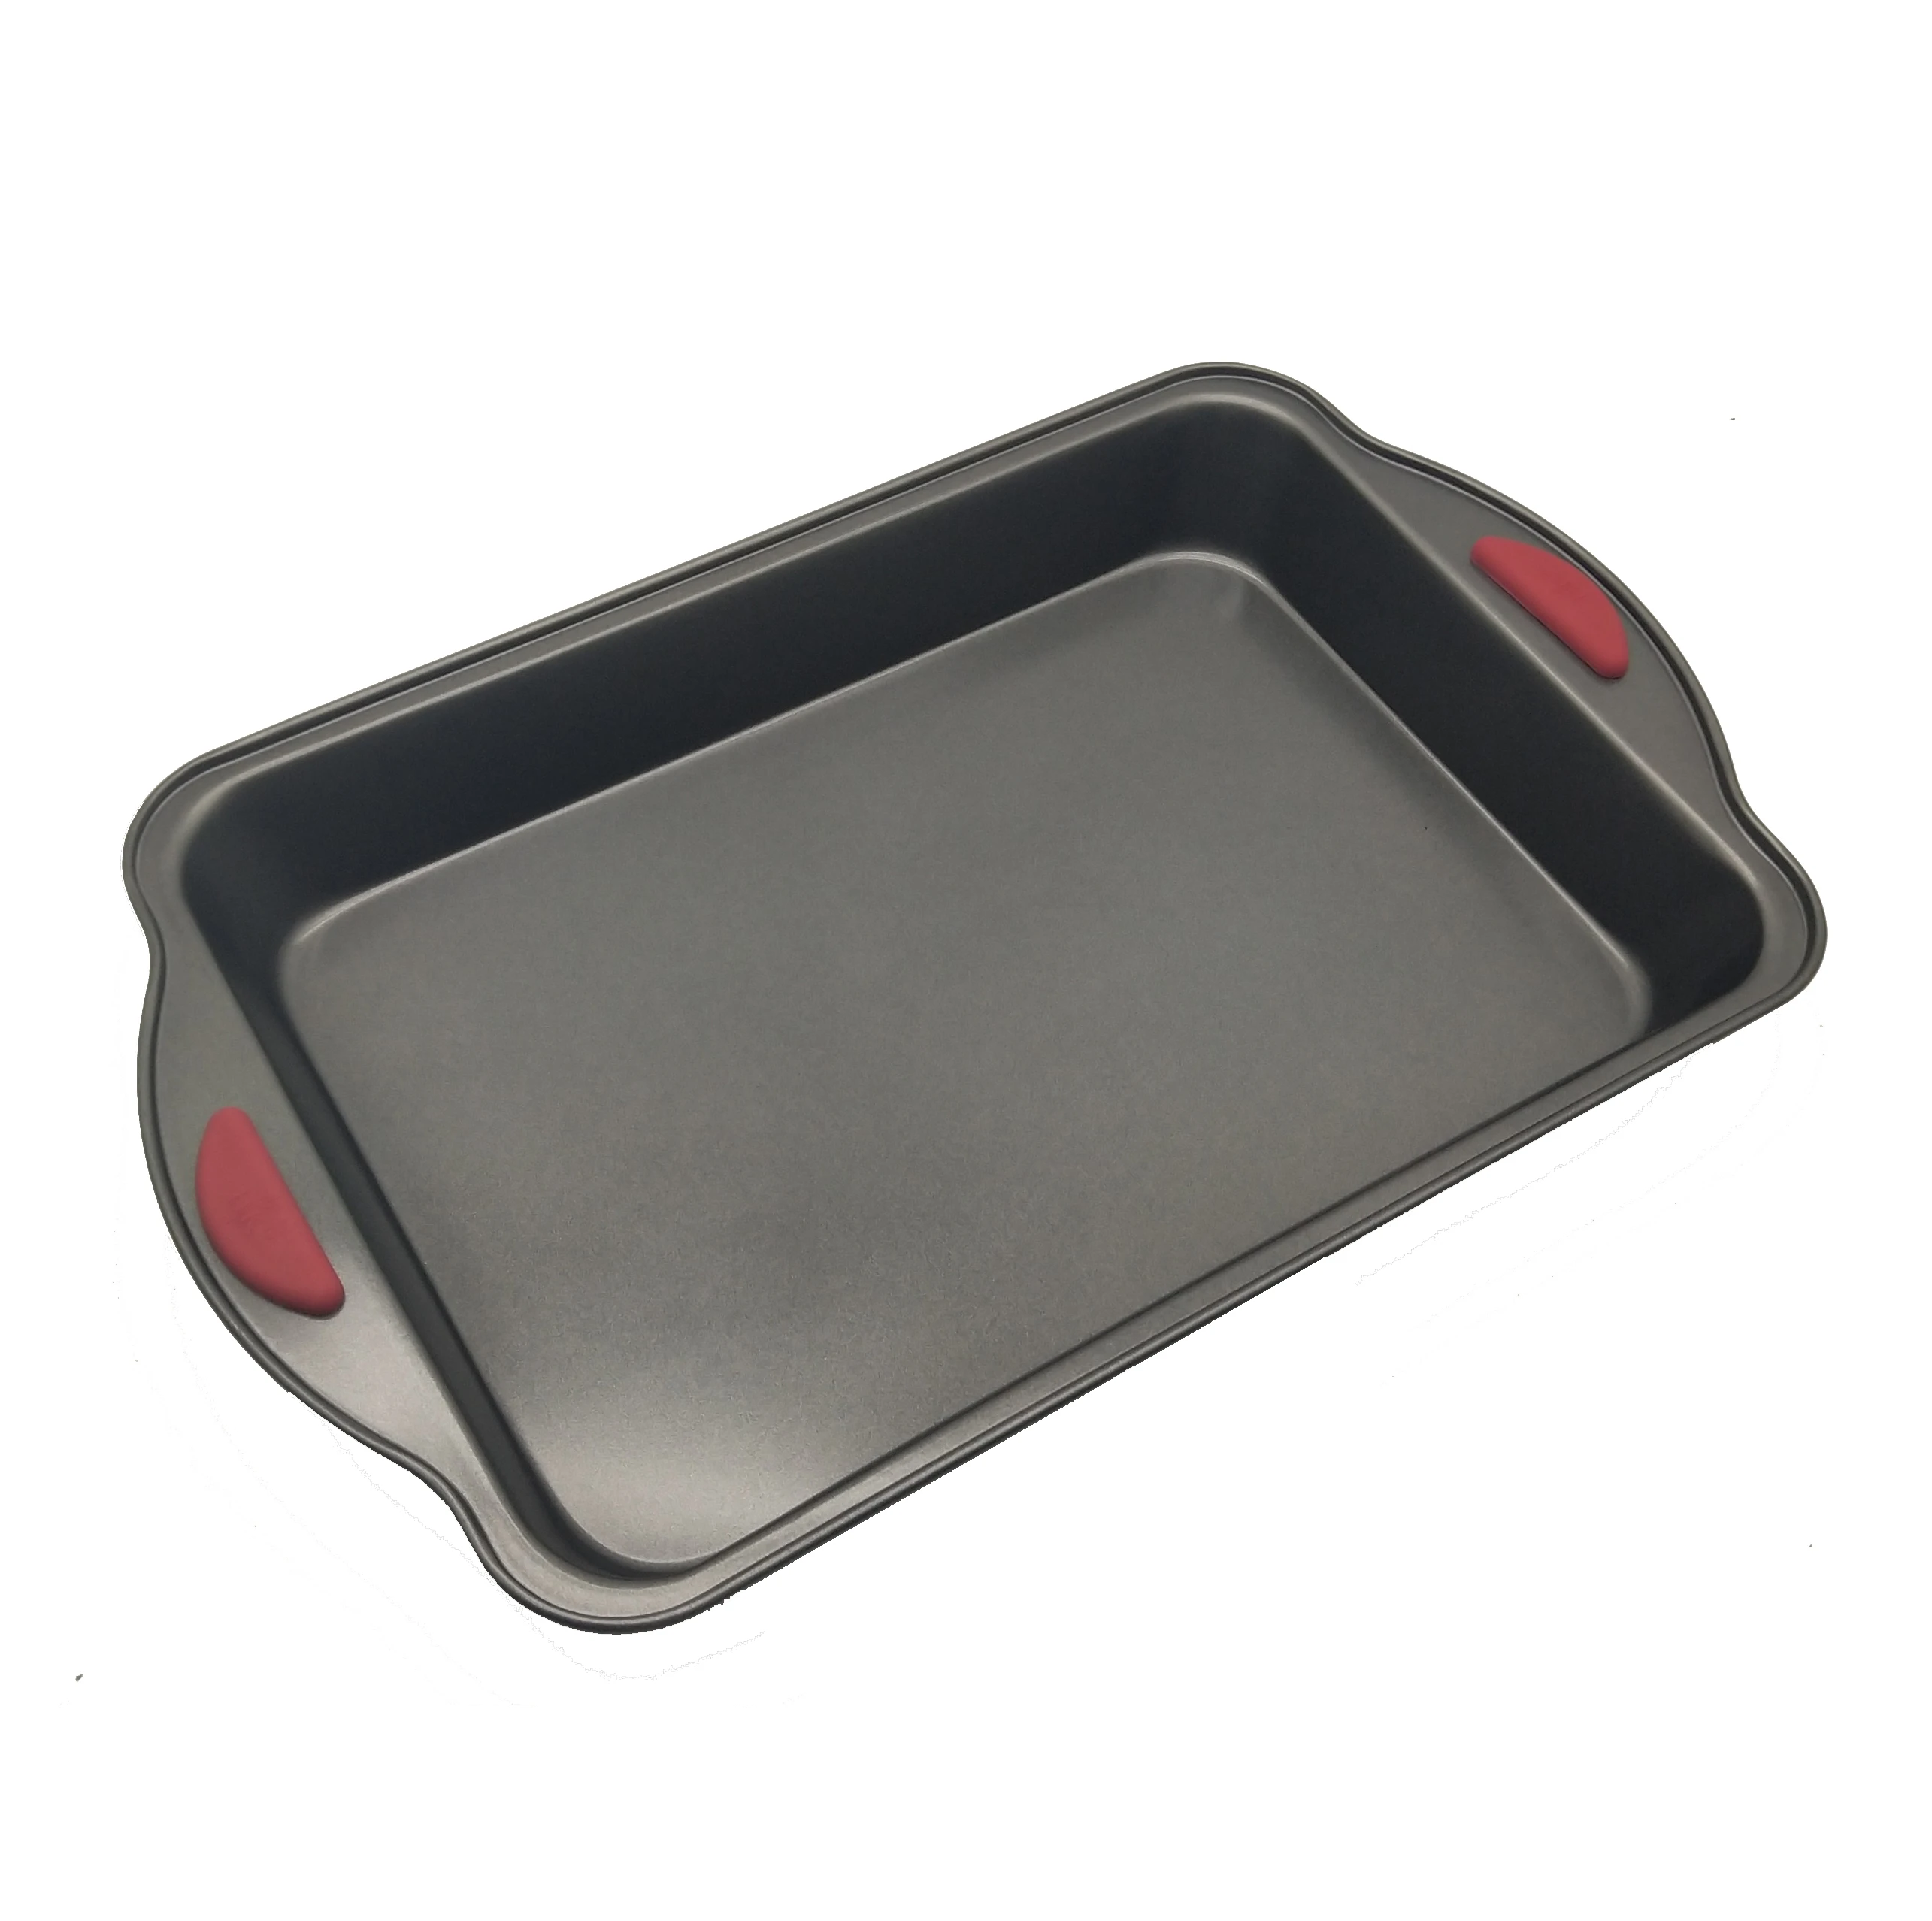 
Amazon hot selling Nonstick Carbon Steel Bakeware Sets With Red Silicone Handles Nonstick Baking Tray  (62342664509)